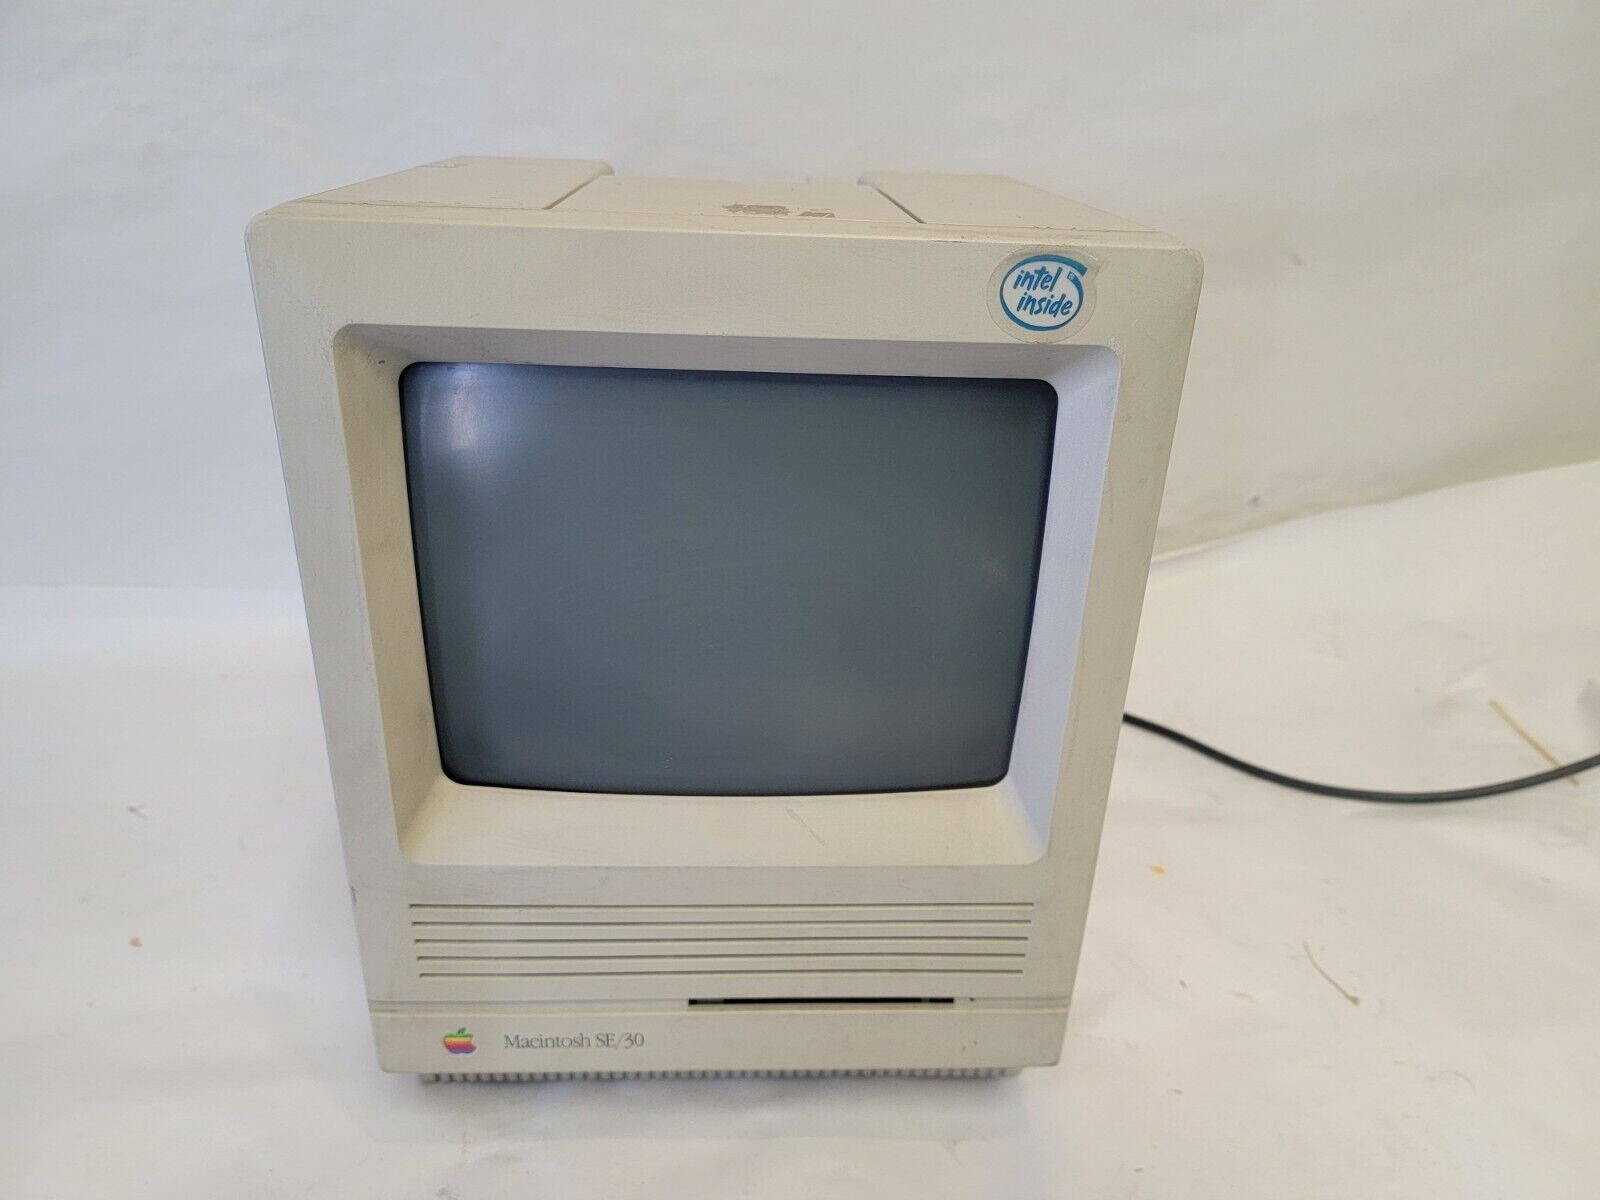 Vintage Apple Macintosh SE/30 M5119 Computer, Turns On But Nothing On Screen